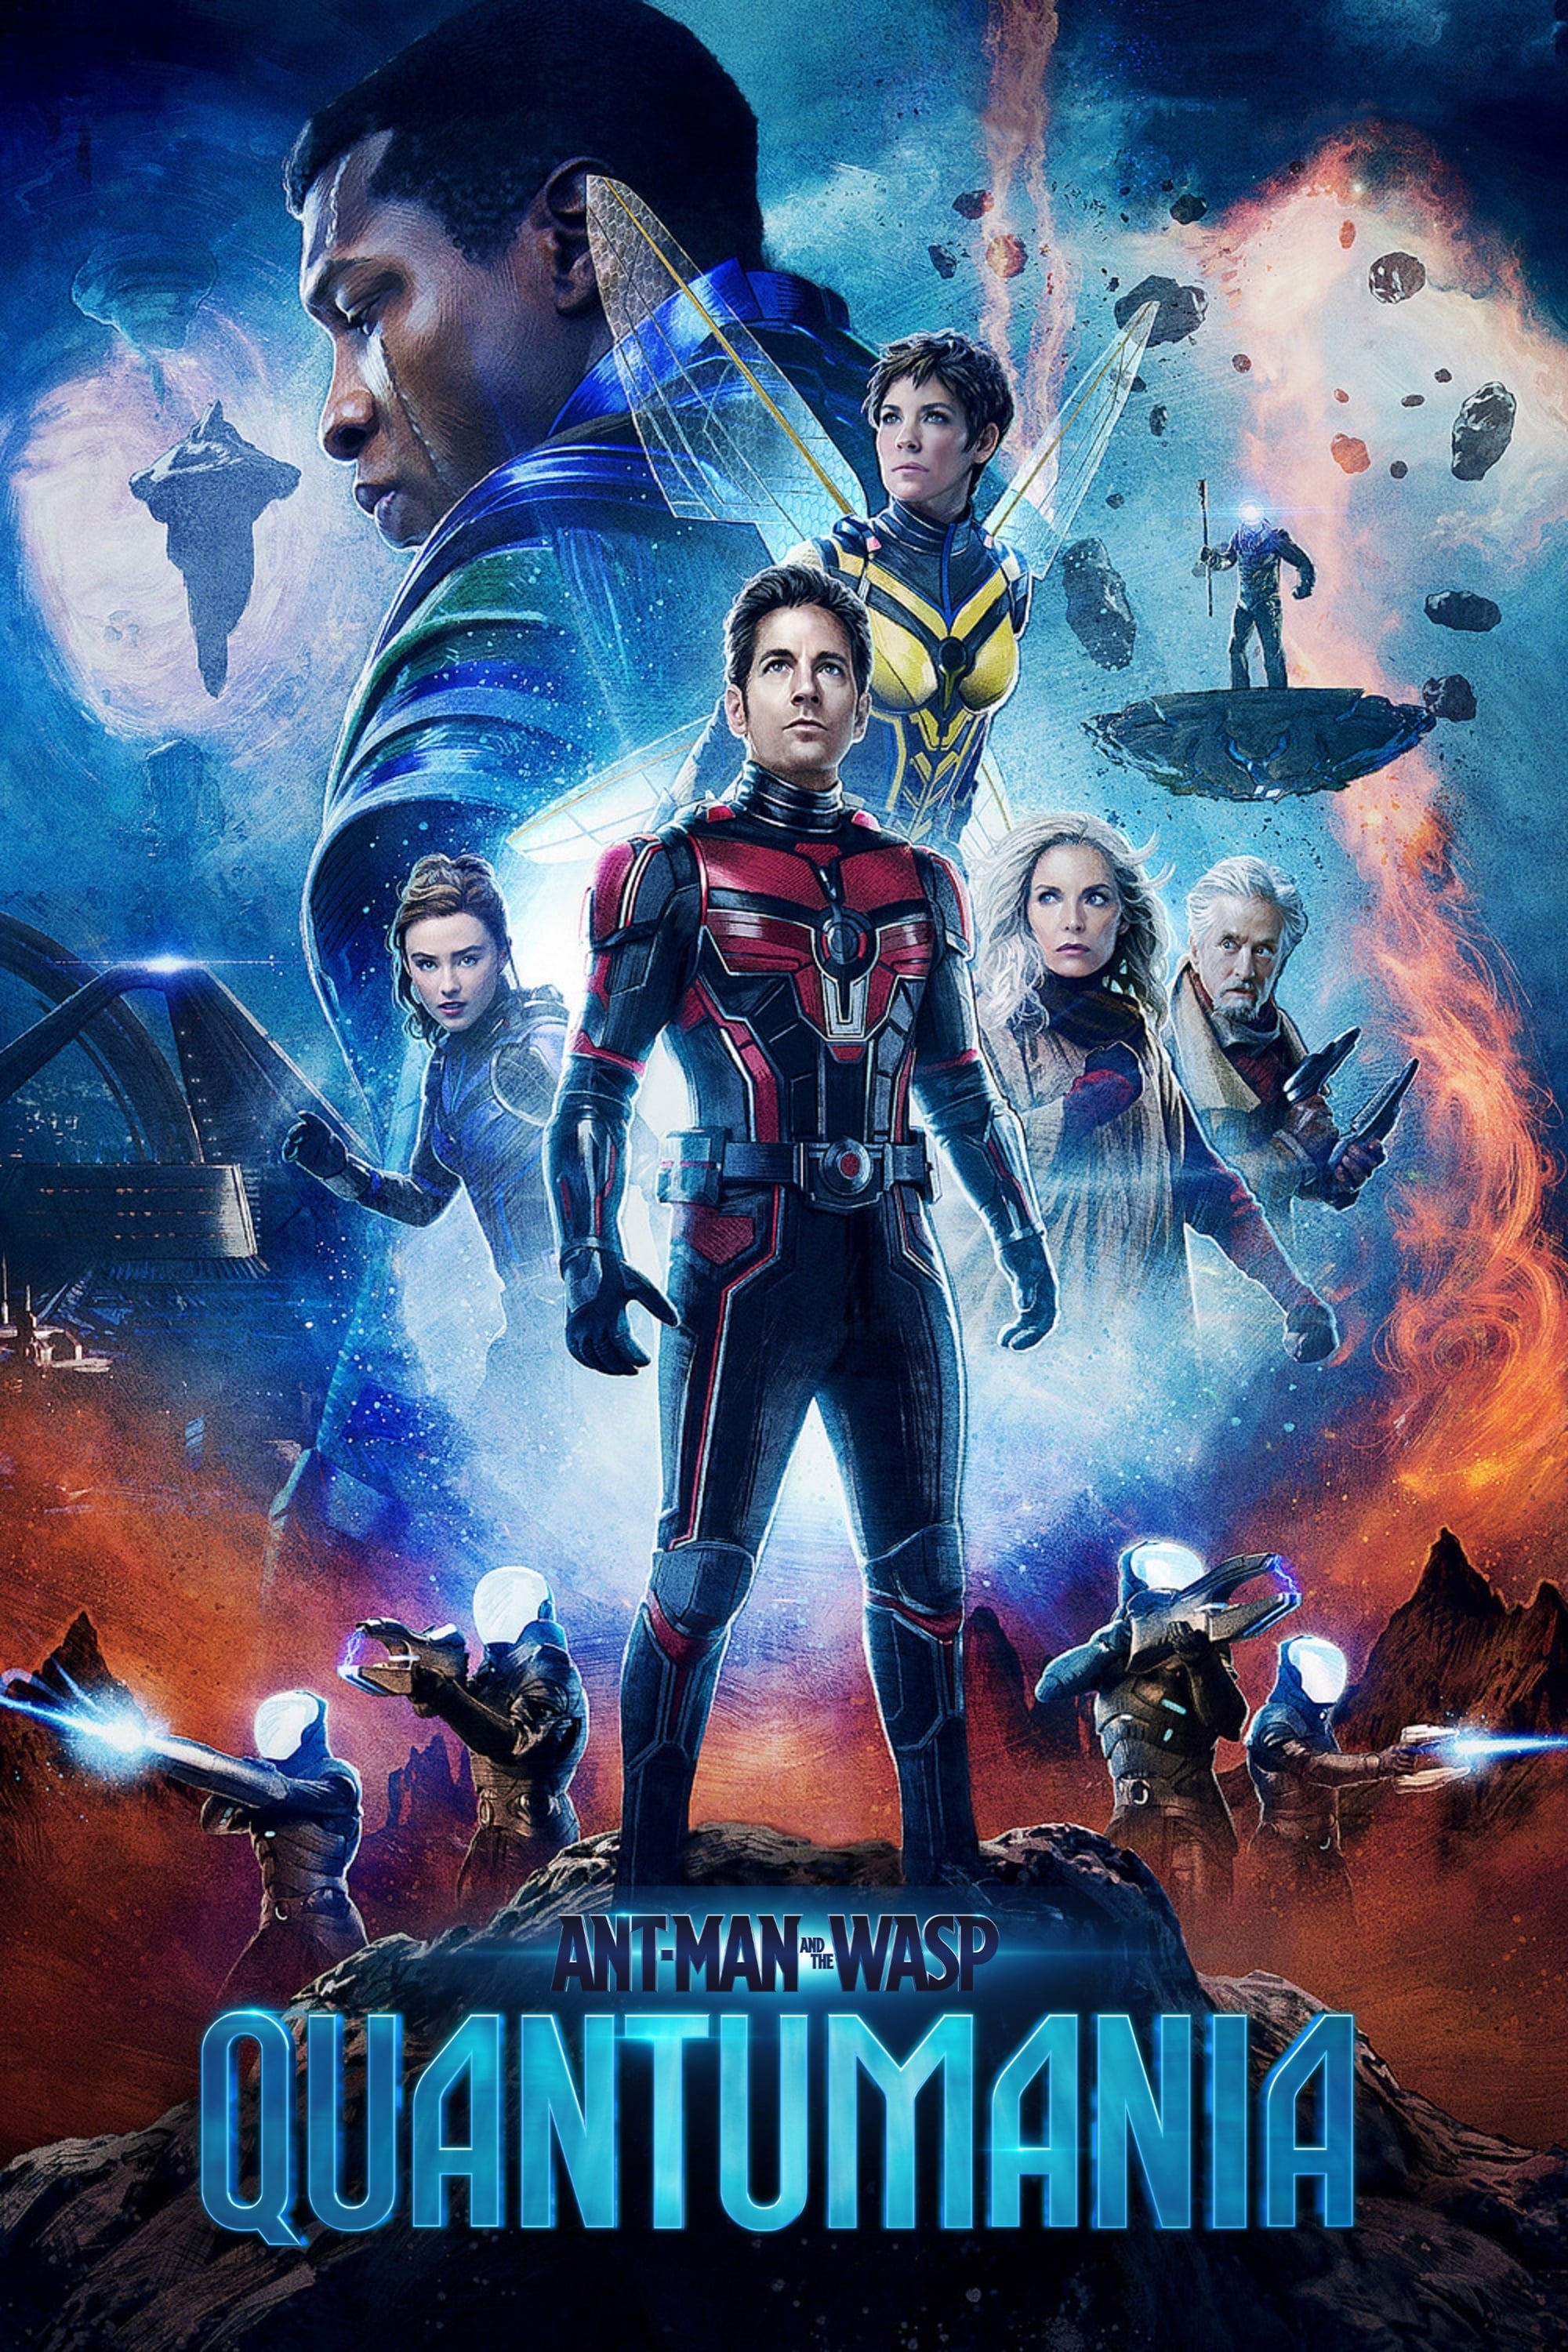 Affiche du film "Ant-Man and the Wasp: Quantumania"